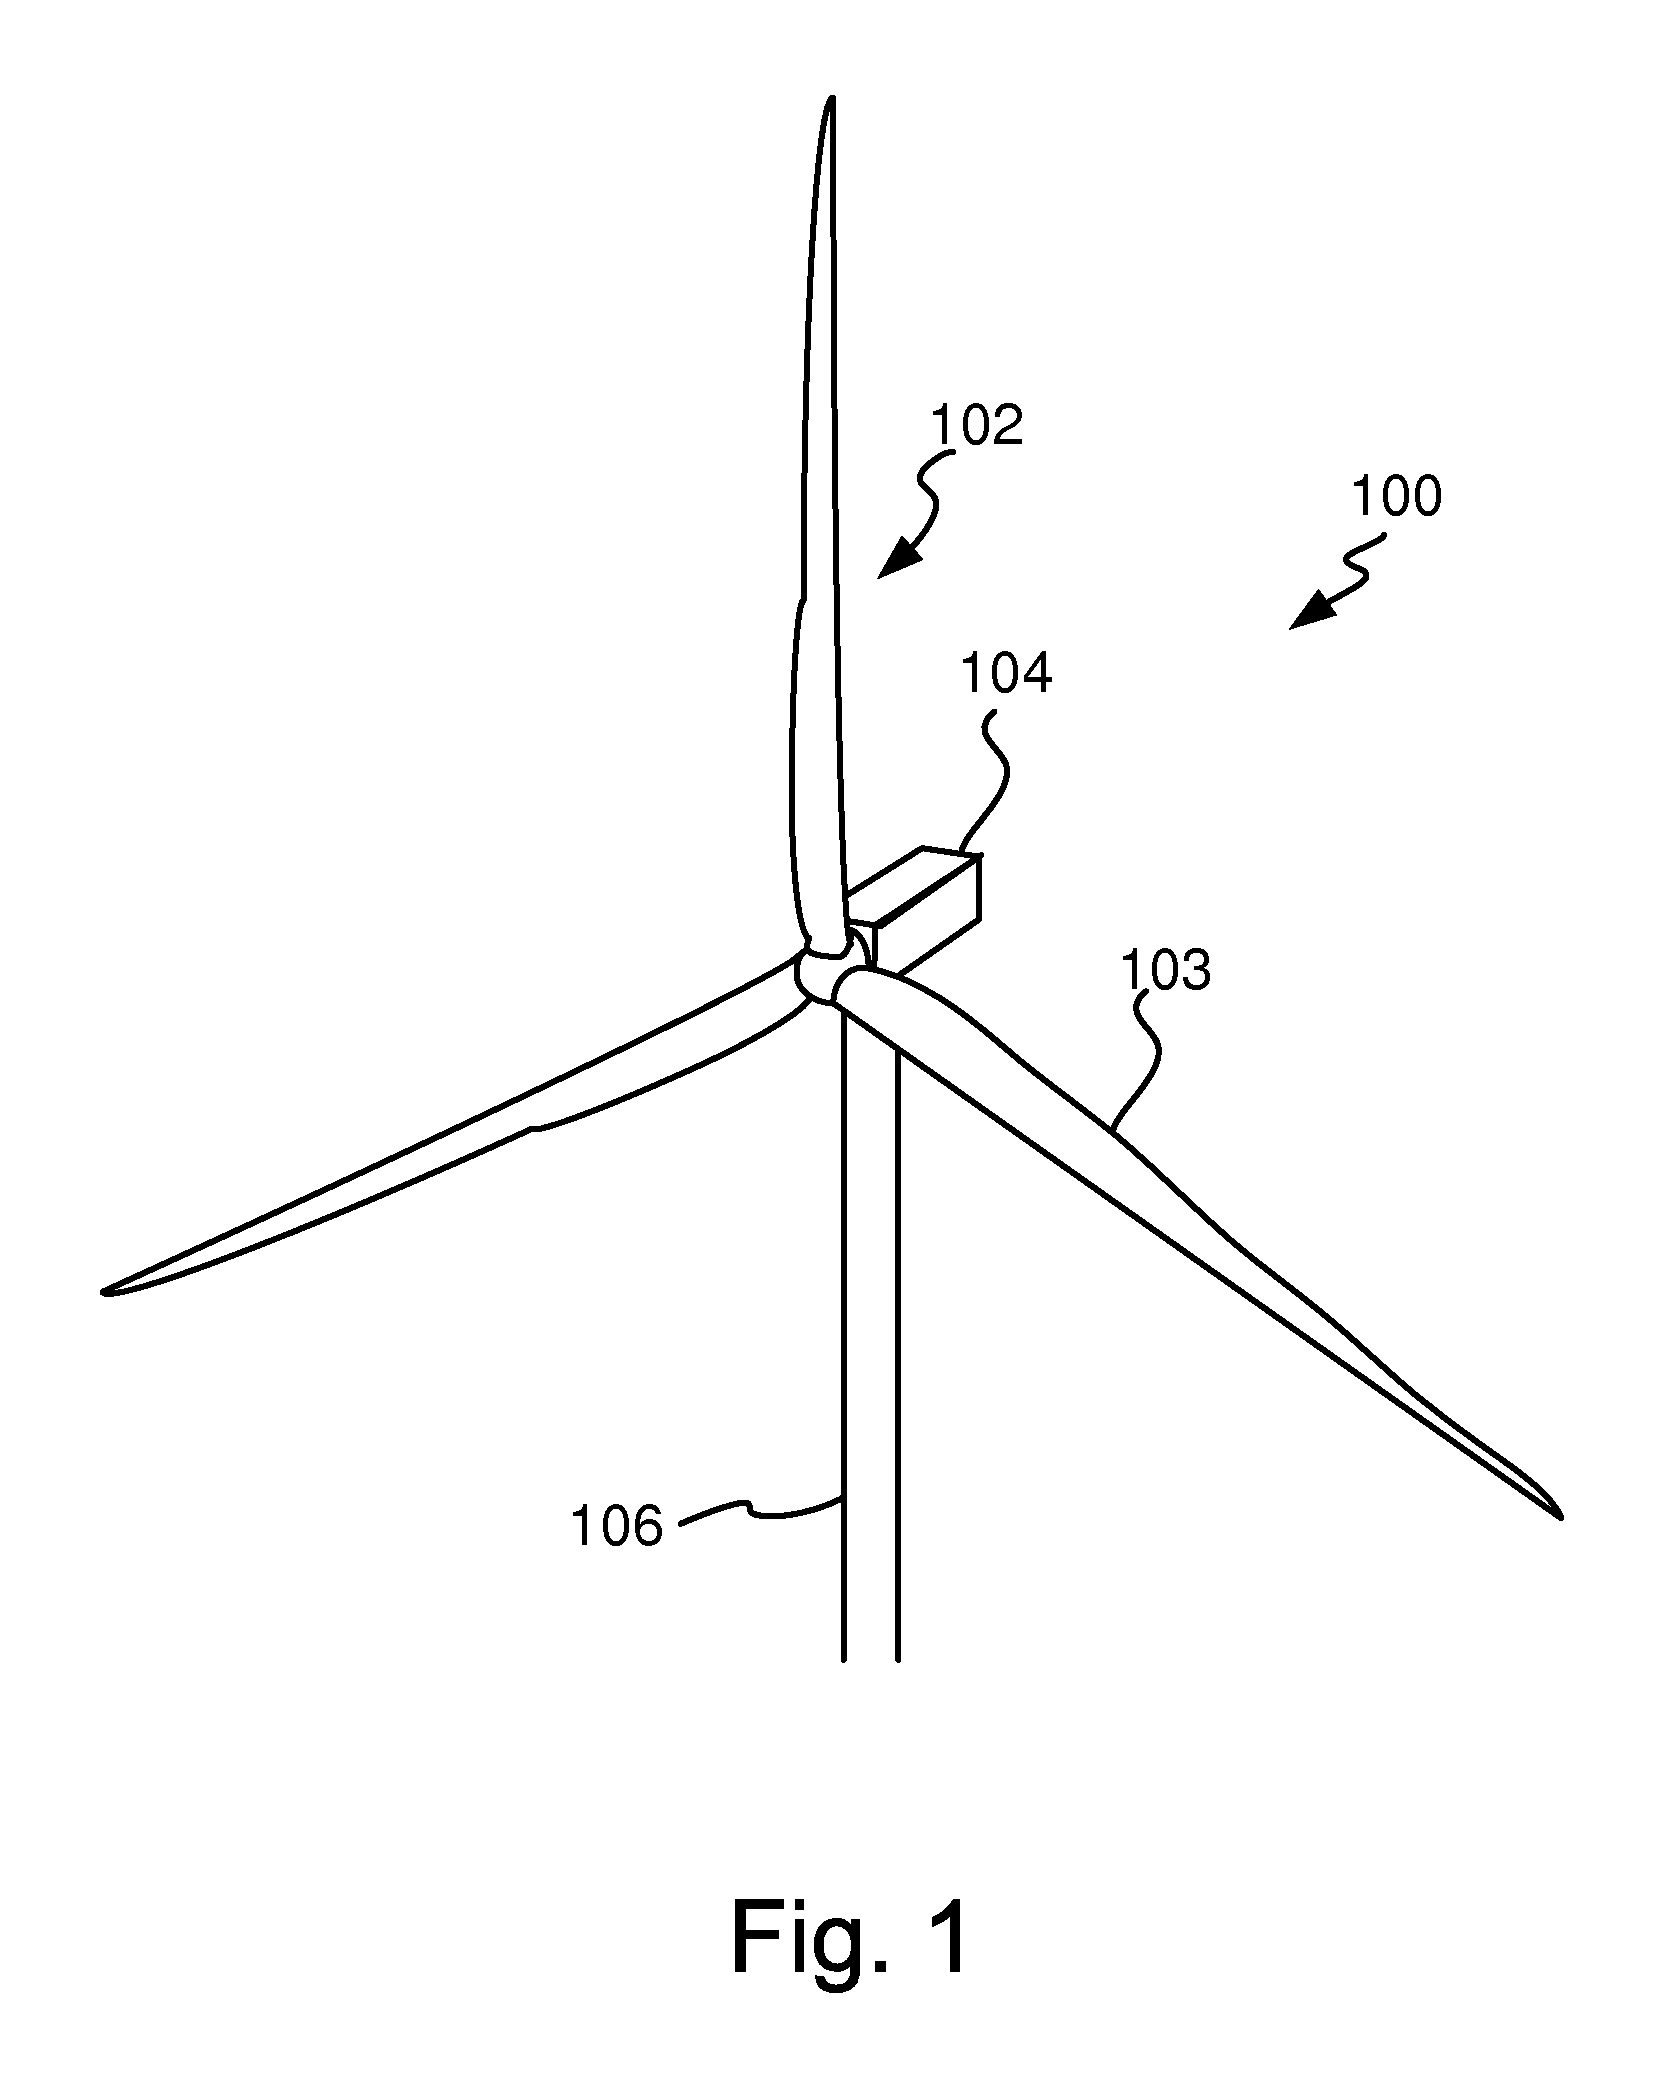 Method of controlling a wind power plant